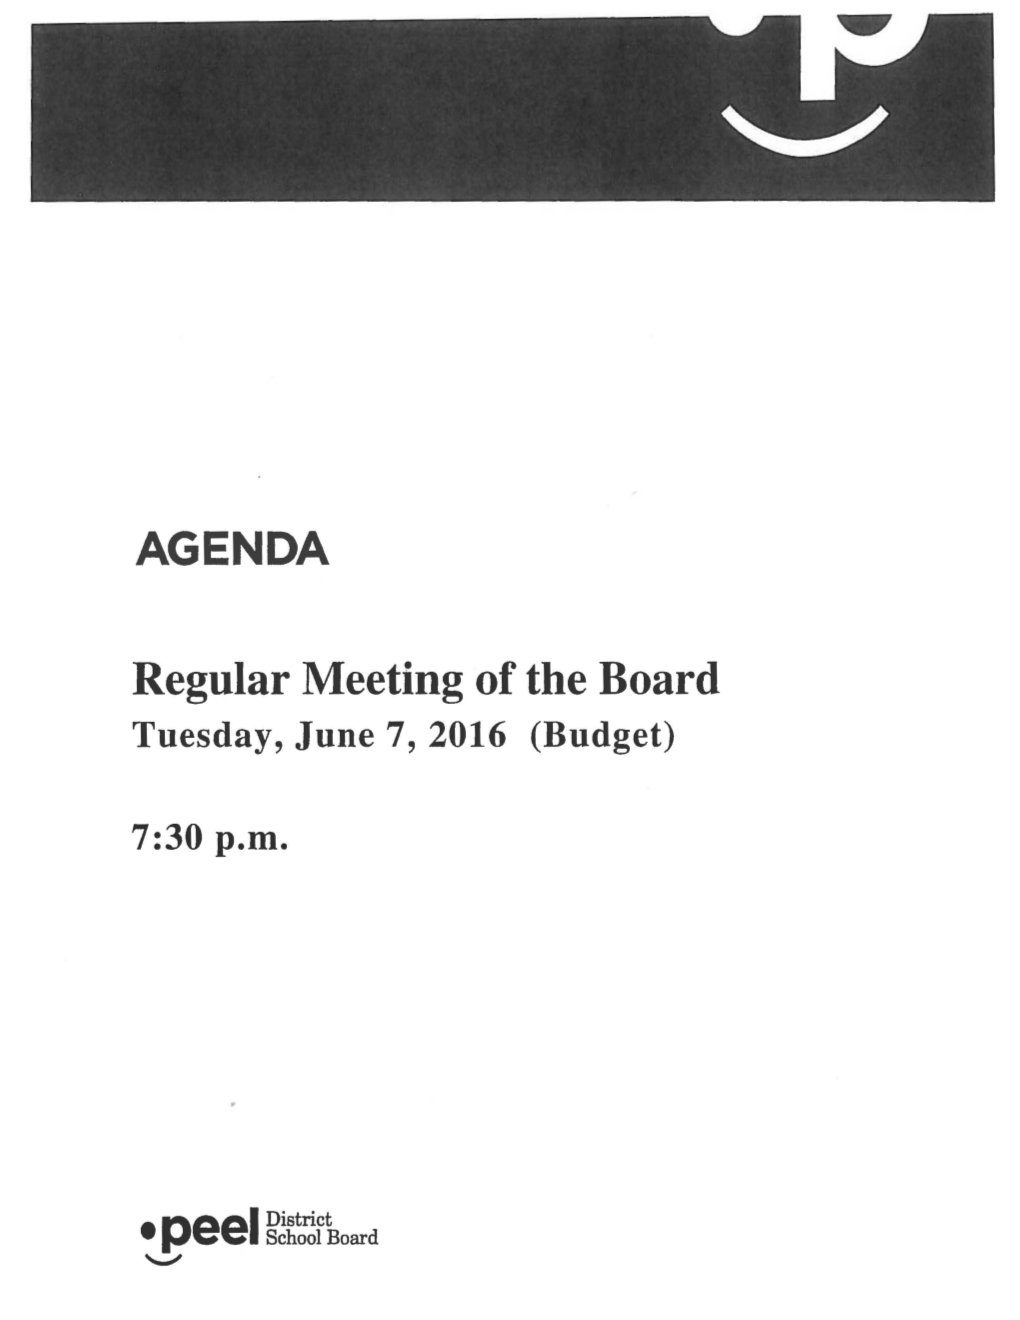 Regular Meeting of the Board Tuesday, June 7, 2016 (Budget)